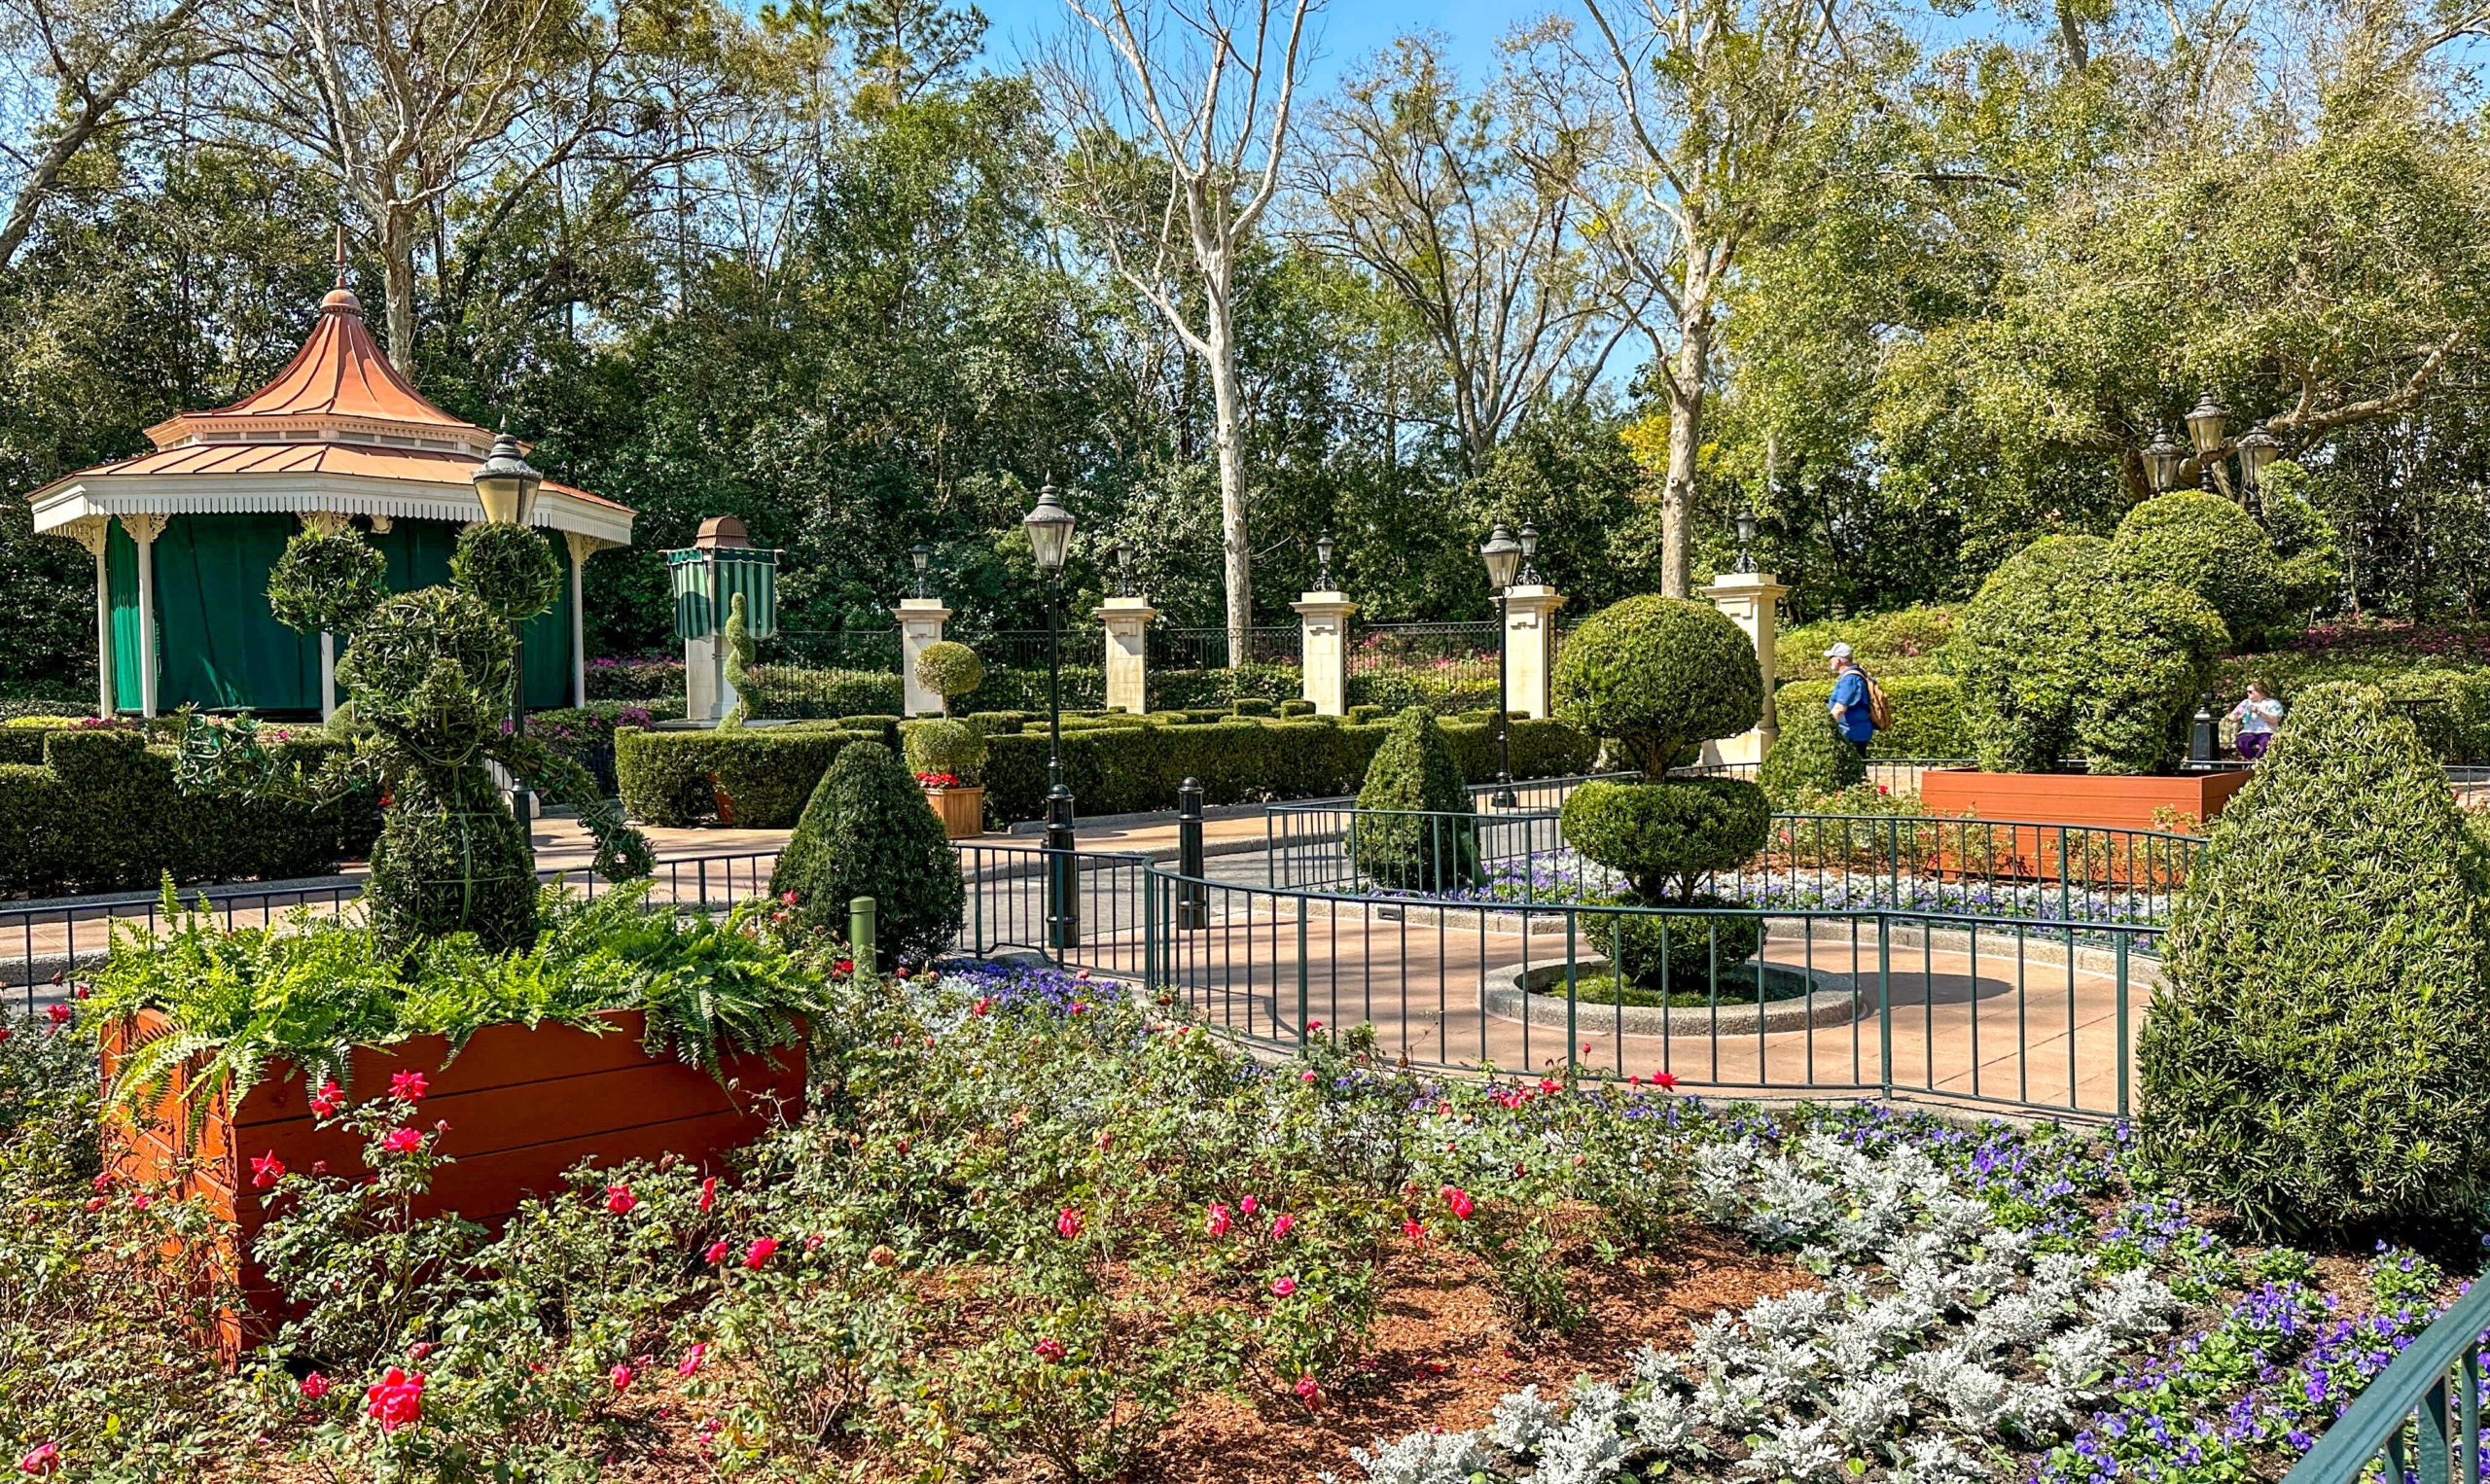 Mickey and Elephant Topiaries